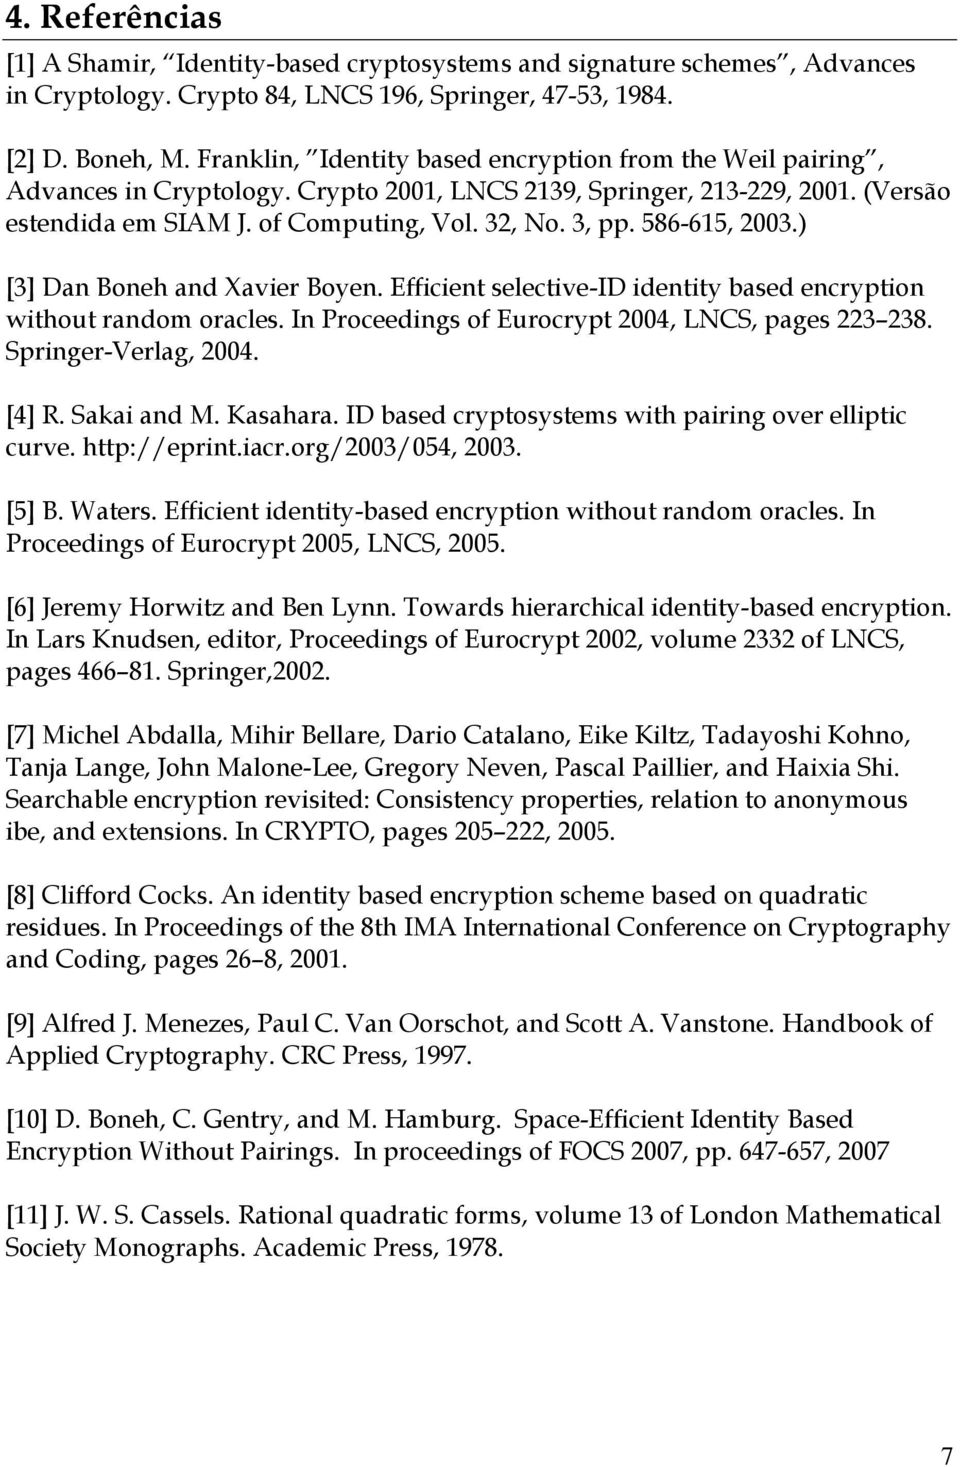 586-615, 2003.) [3] Dan Boneh and Xavier Boyen. Efficient selective-id identity based encryption without random oracles. In Proceedings of Eurocrypt 2004, LNCS, pages 223 238. Springer-Verlag, 2004.